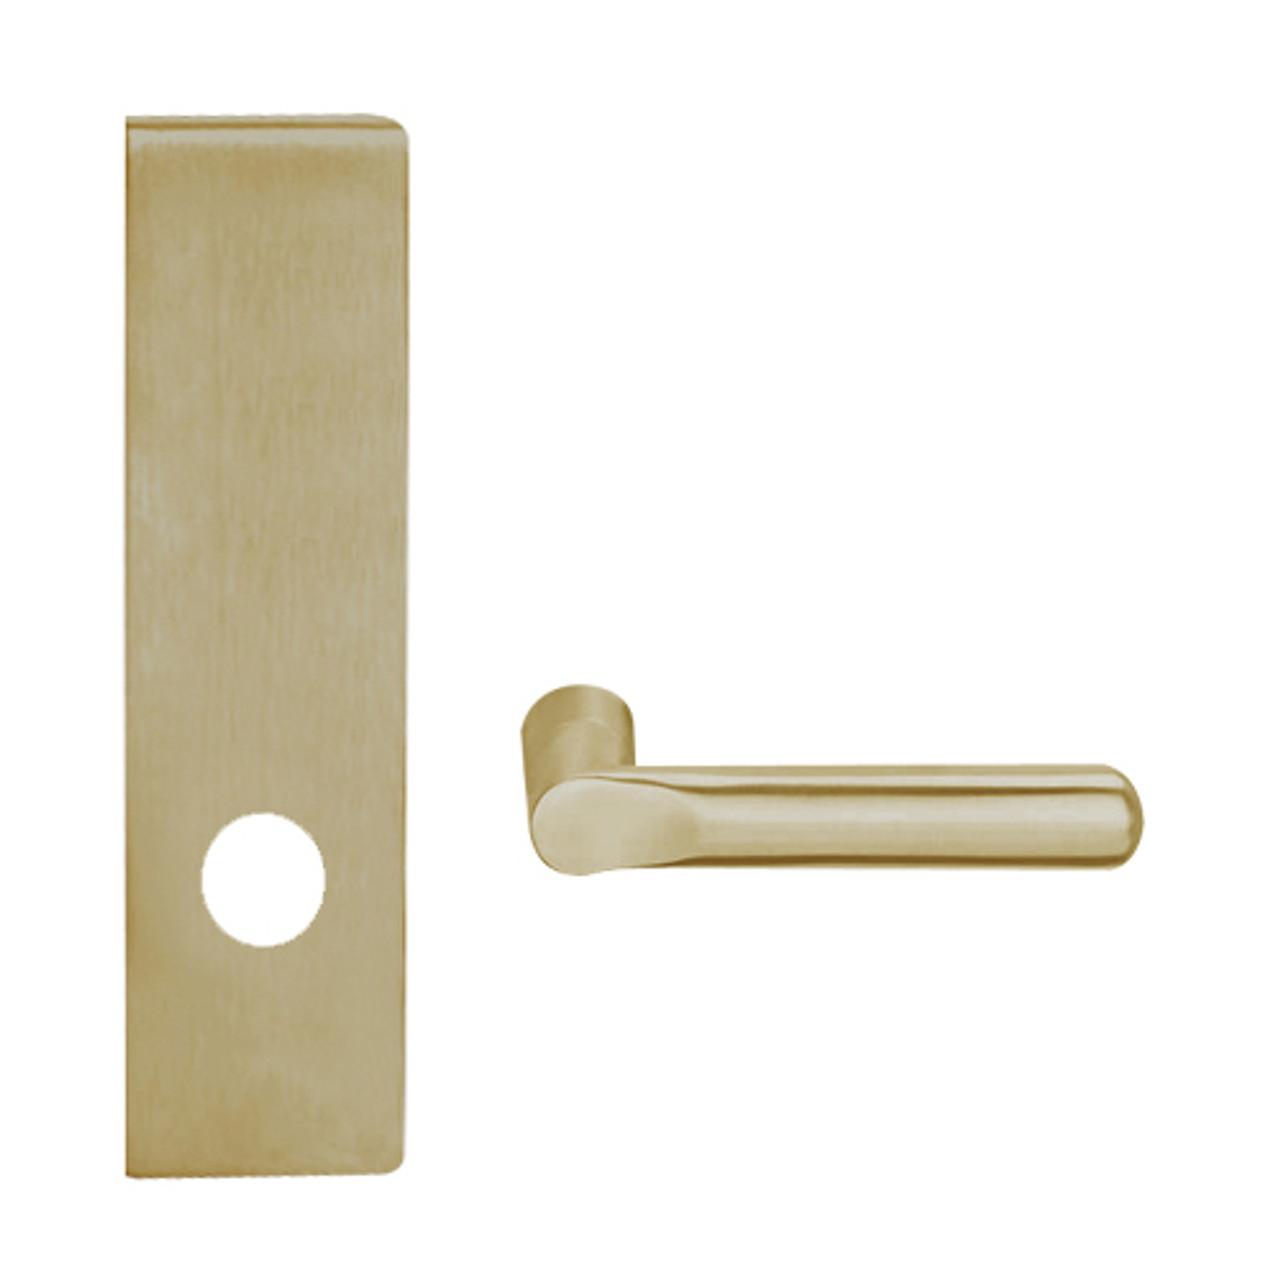 L9010-18N-612 Schlage L Series Passage Latch Commercial Mortise Lock with 18 Cast Lever Design in Satin Bronze